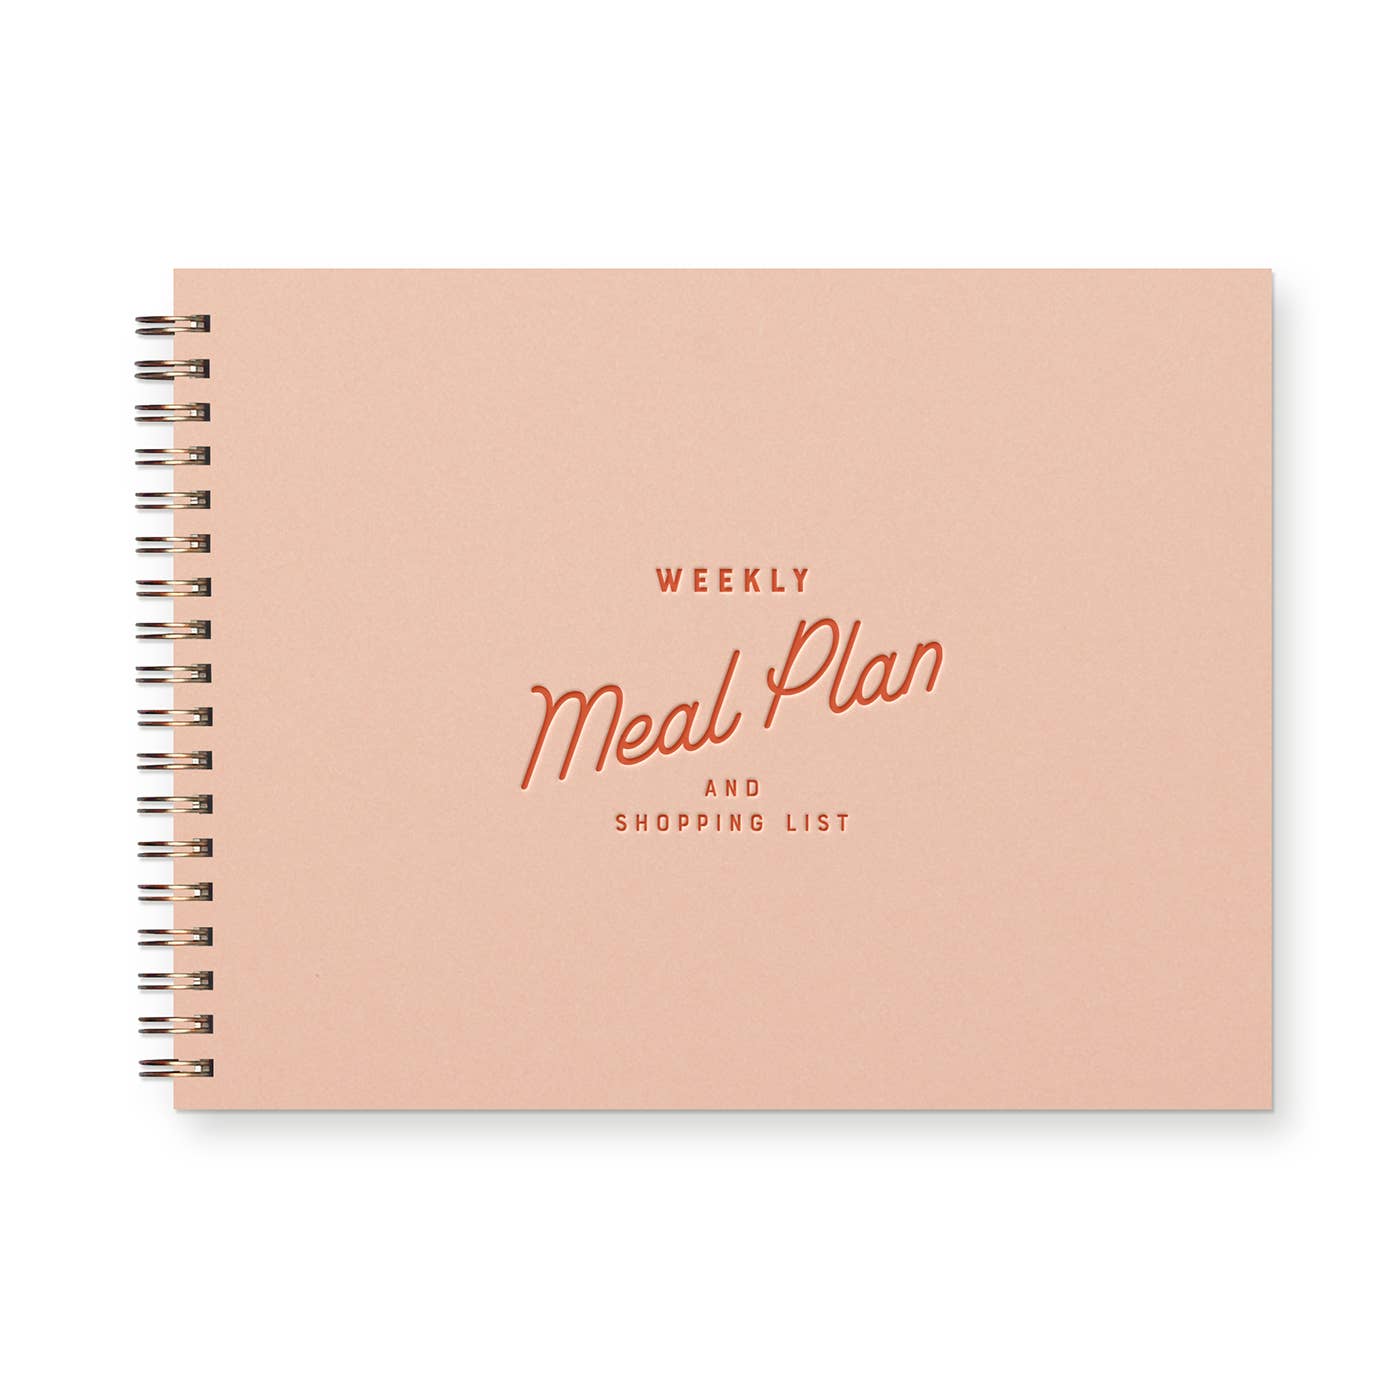 Ruff House Print Shop - Retro Weekly Meal Planner: Seashell Cover | Canyon Ink